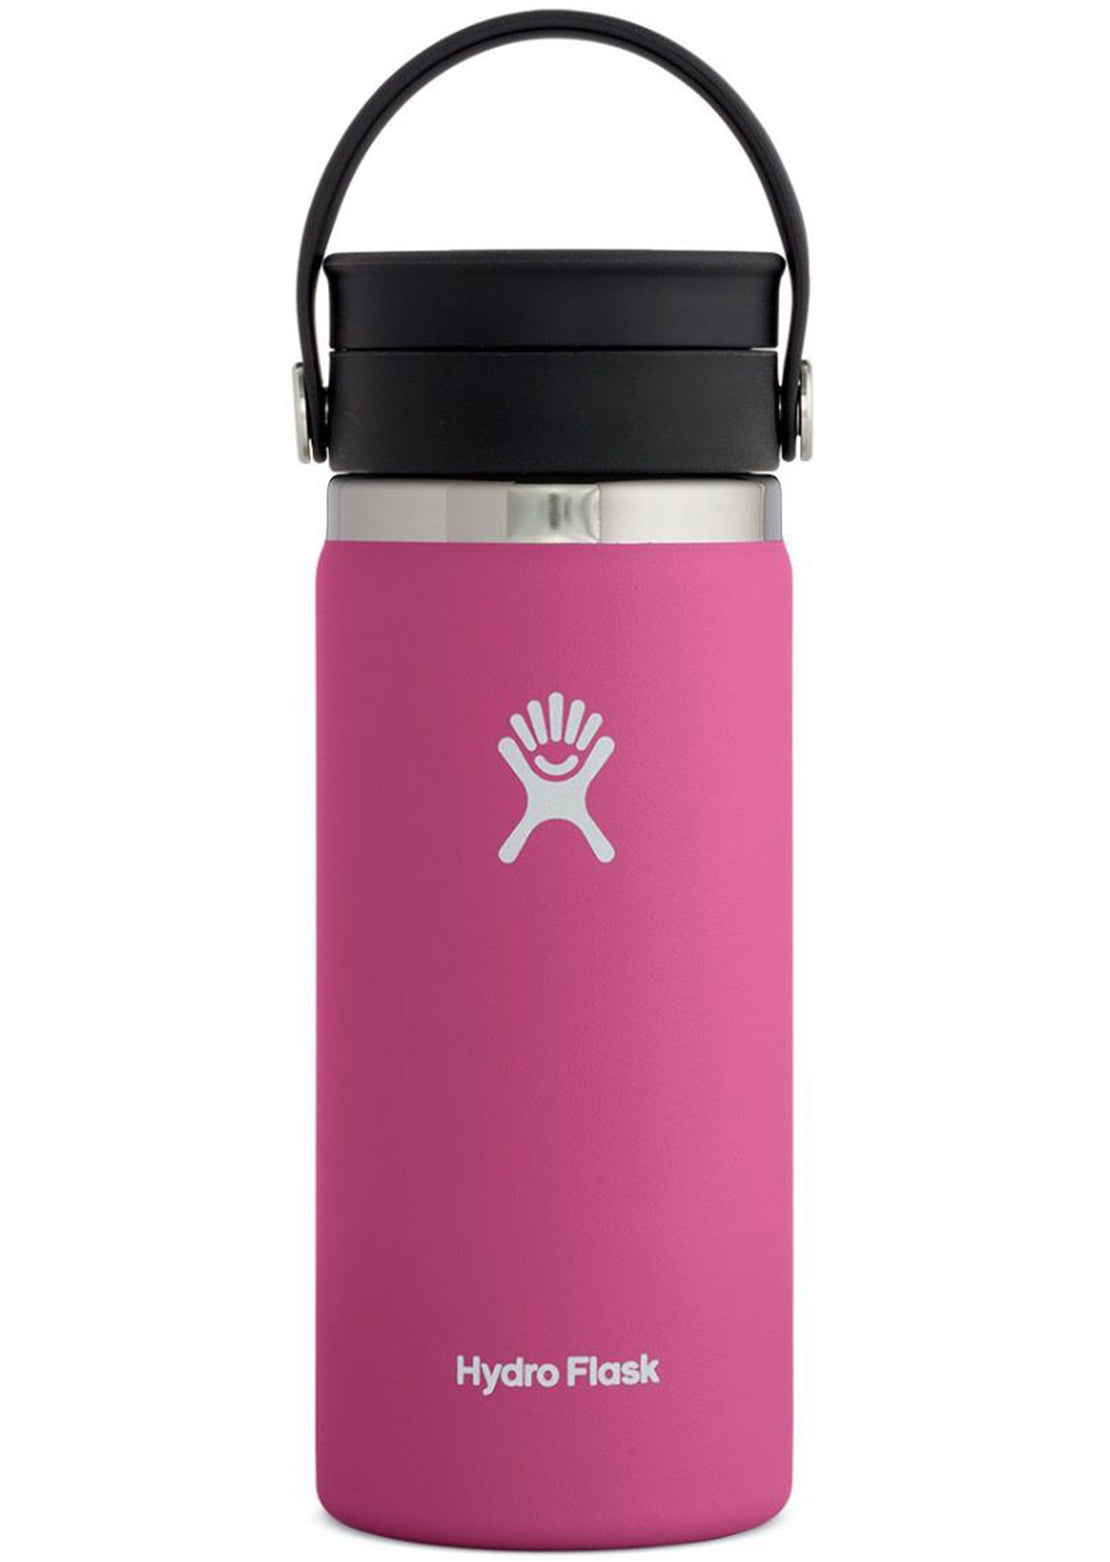 Hydro Flask 16oz Wide Mouth With Flex Sip Lid Coffee Tumbler Carnation